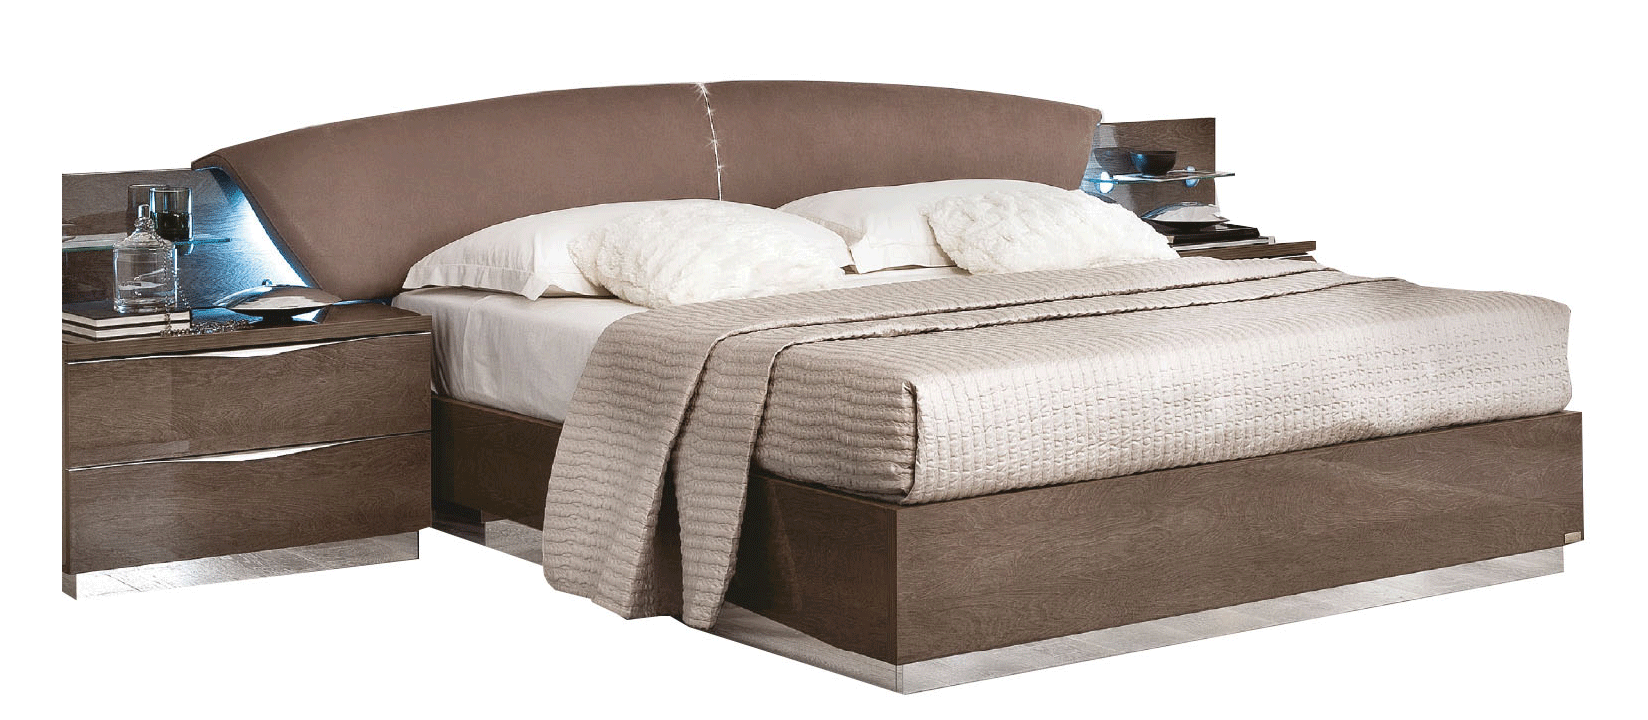 Brands Camel Classic Collection, Italy Platinum DROP Bed SILVER BIRCH